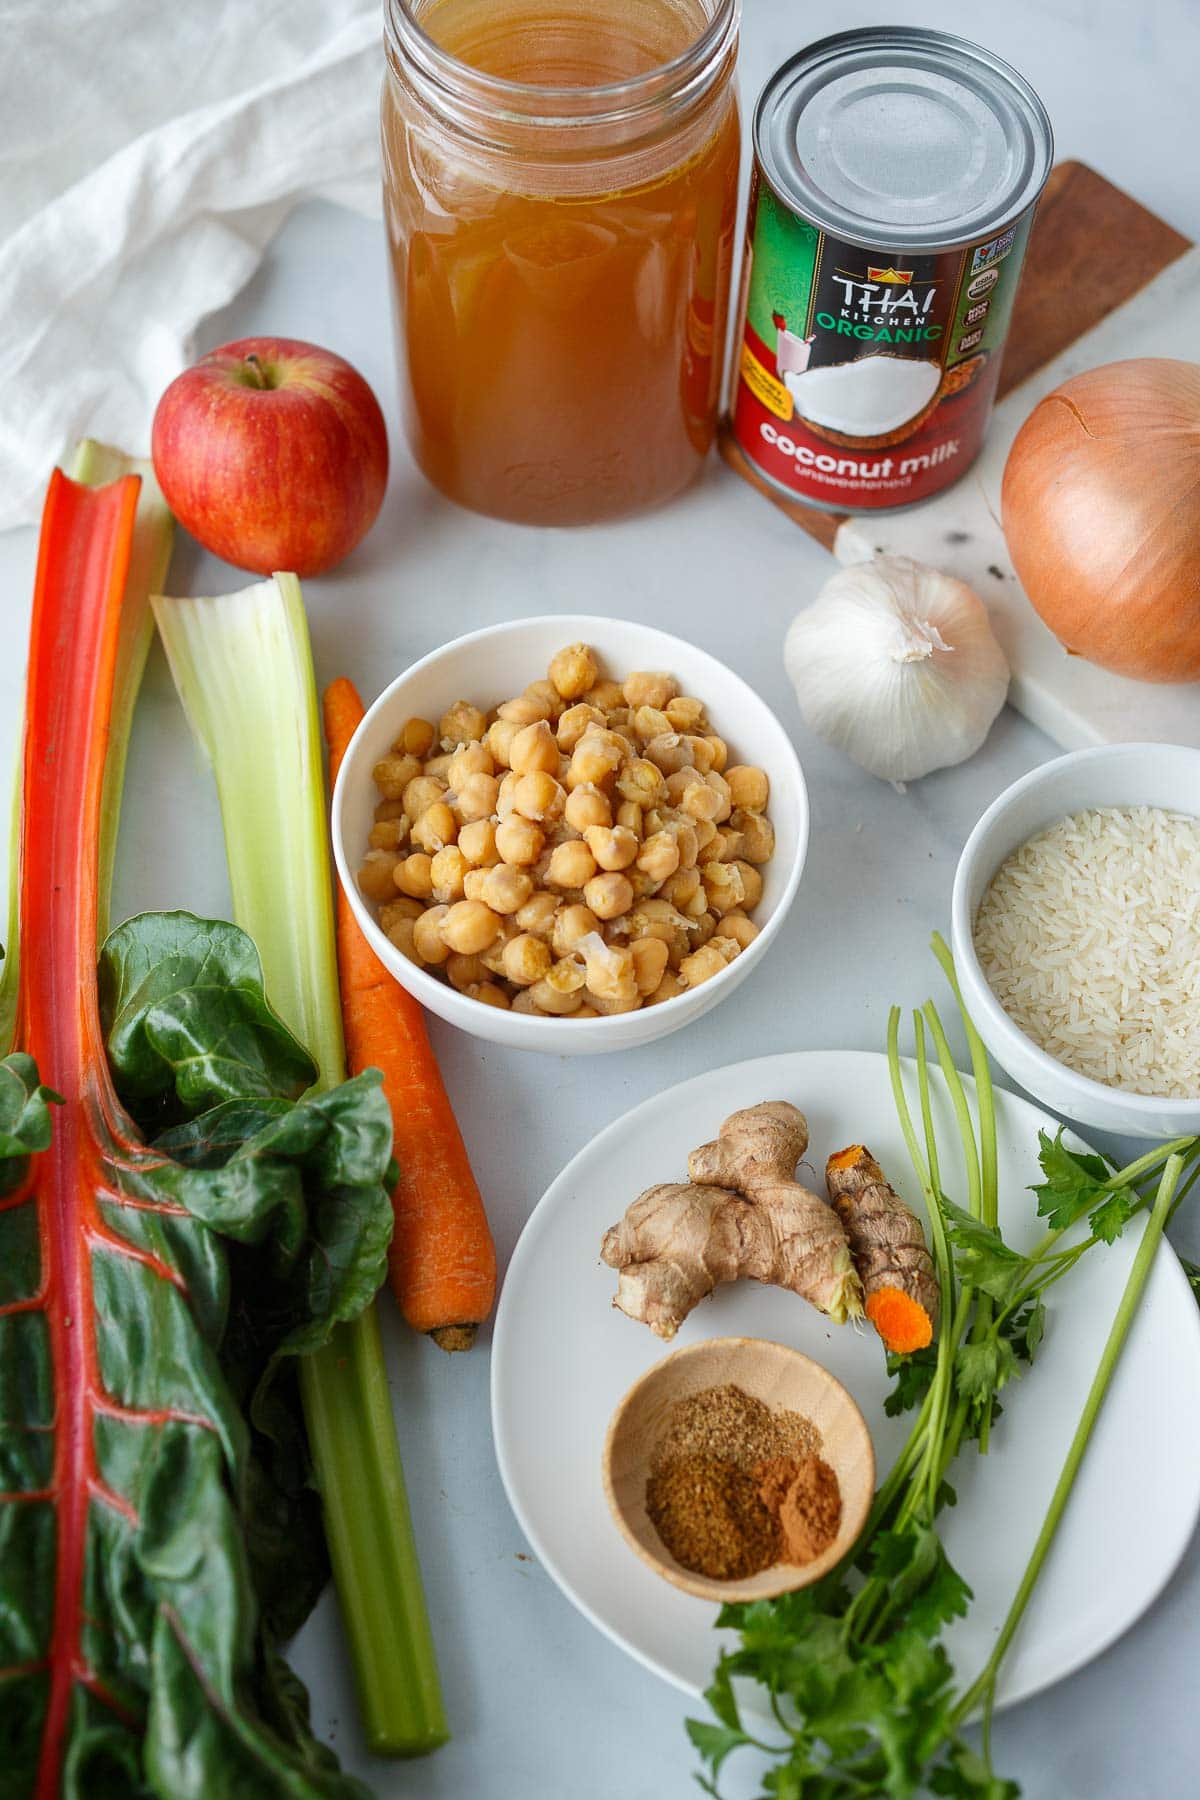 ingredients for creamy chickpea soup laid out - chickpeas, coconut milk, onion, garlic, apple, broth, chard, celery, carrot, rice, turmeric, ginger, spices, parsley.